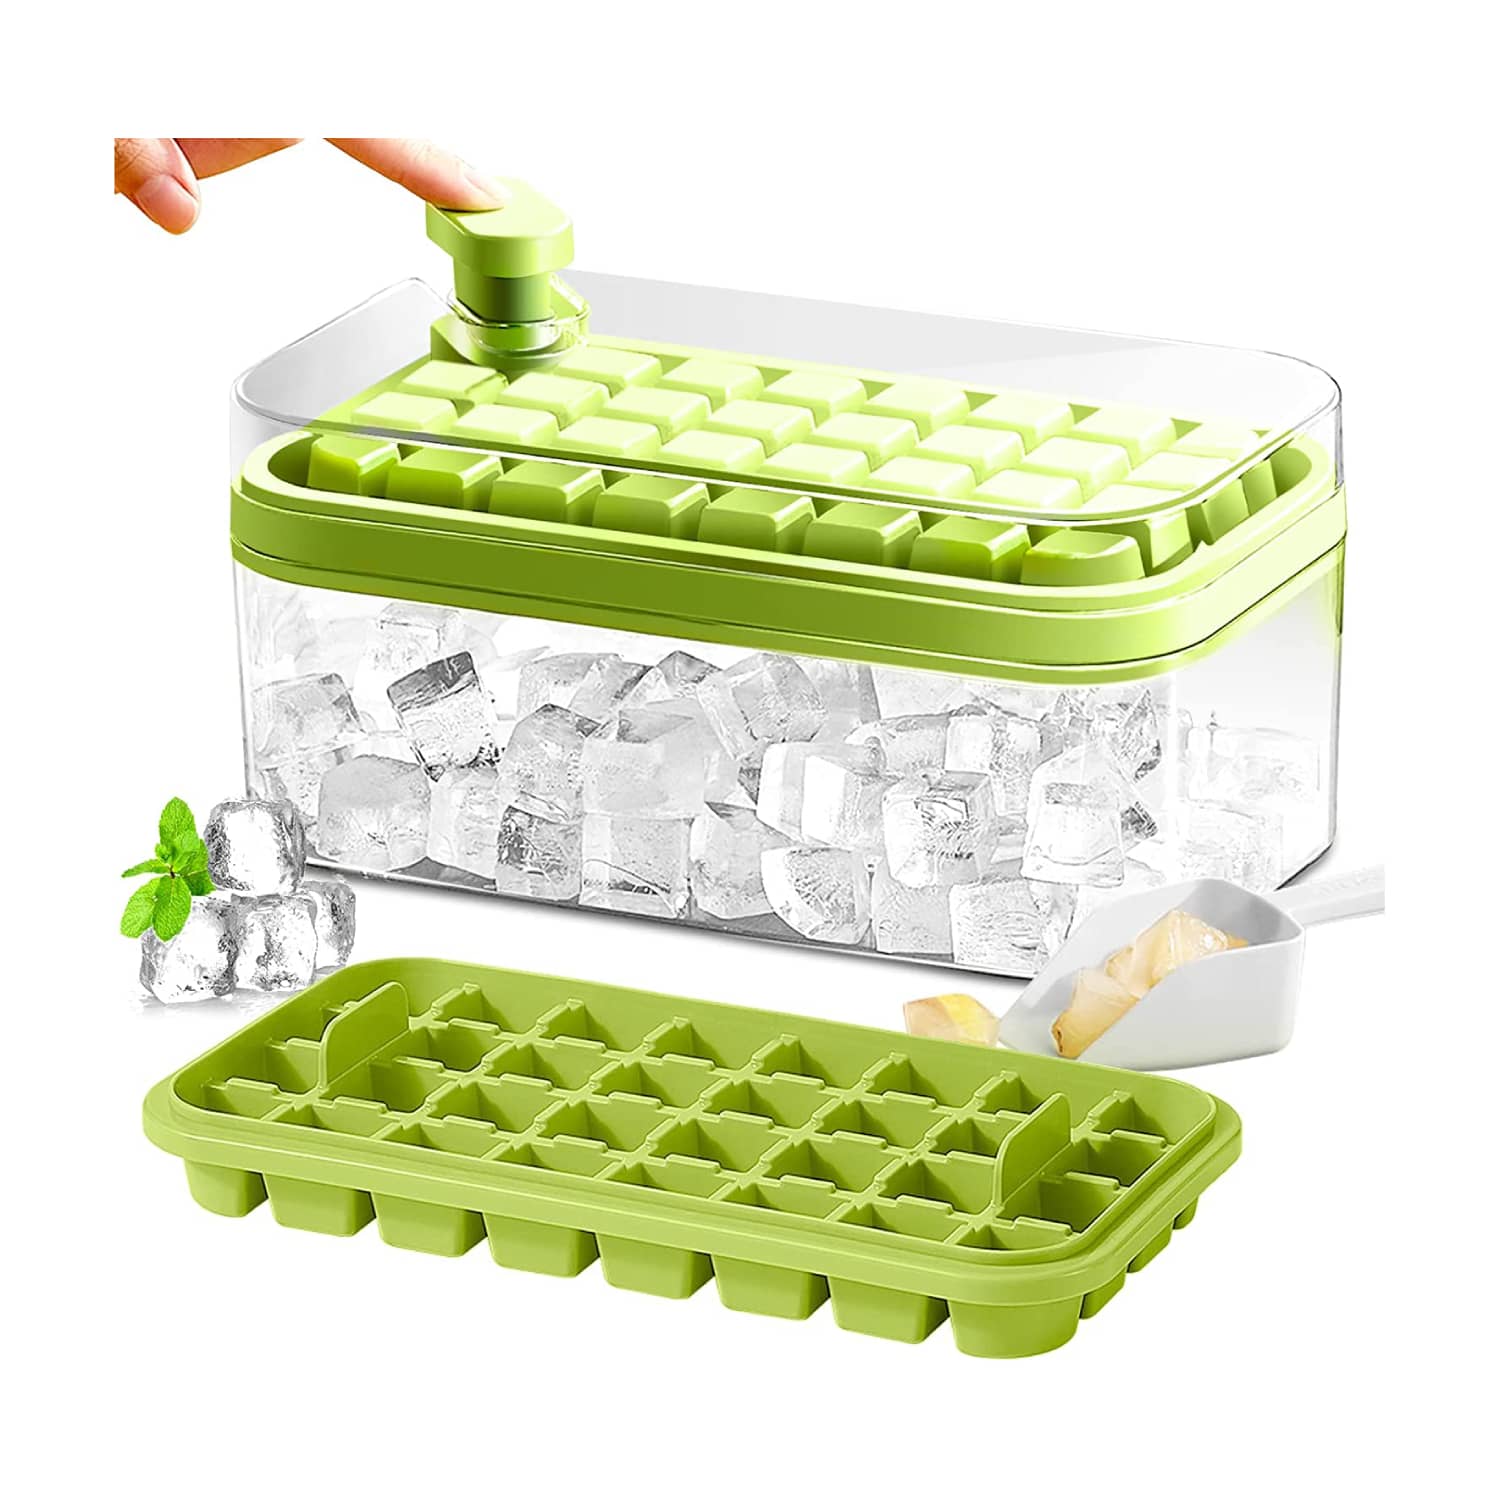 Ice Cube Tray Stand – The Tickle Trunk